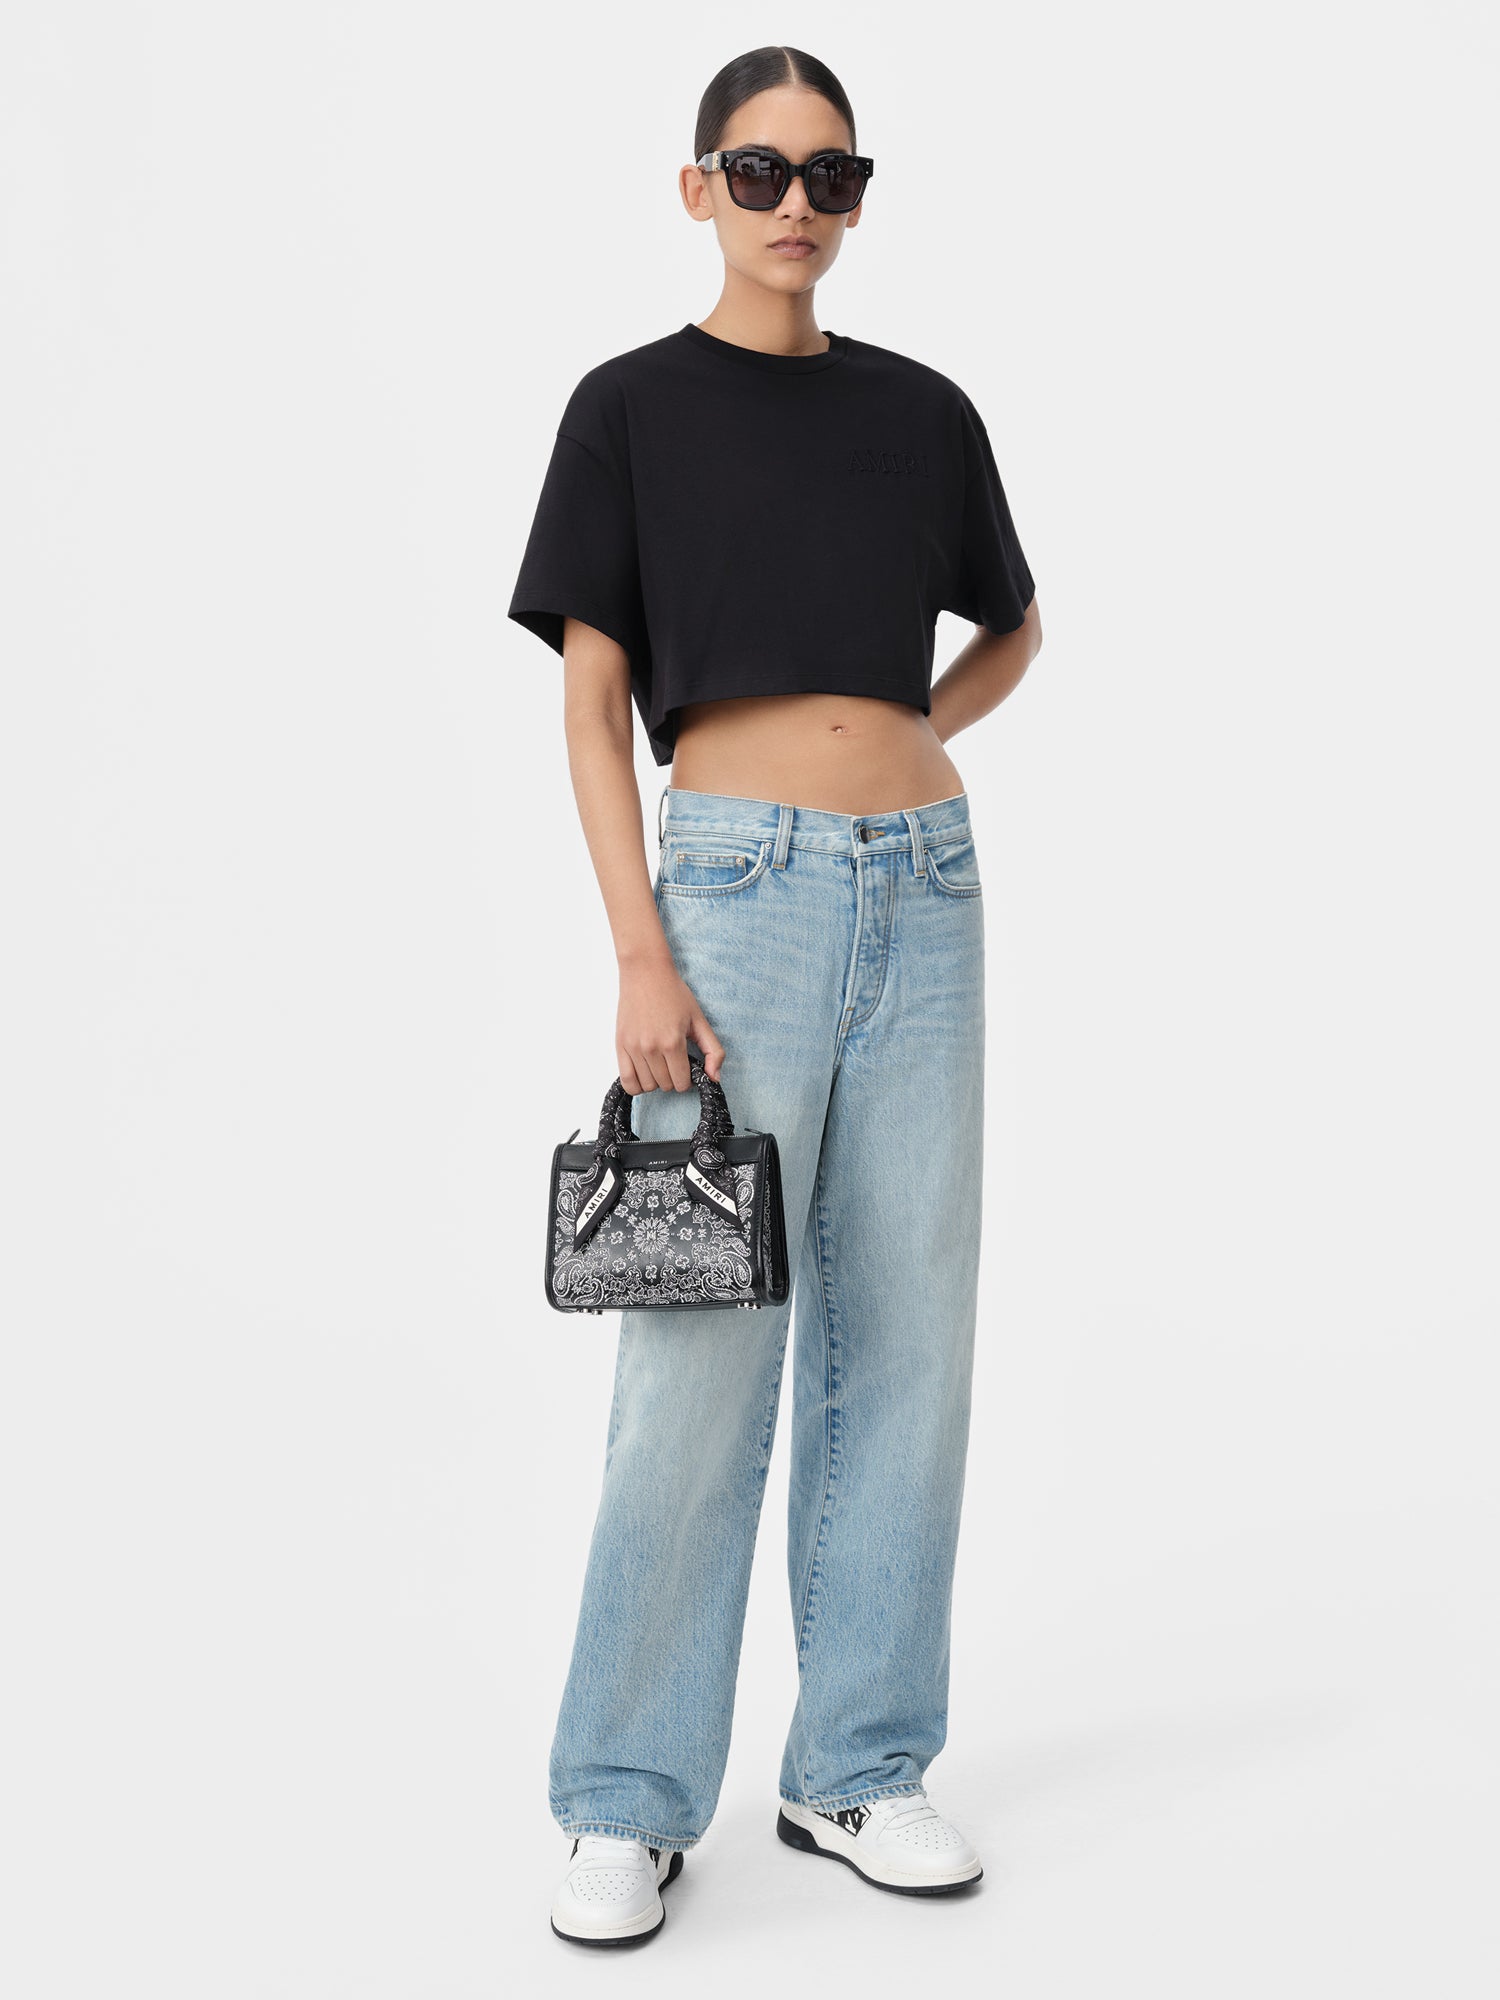 Product WOMEN - AMIRI EMBROIDERED CROPPED TEE - Black featured image